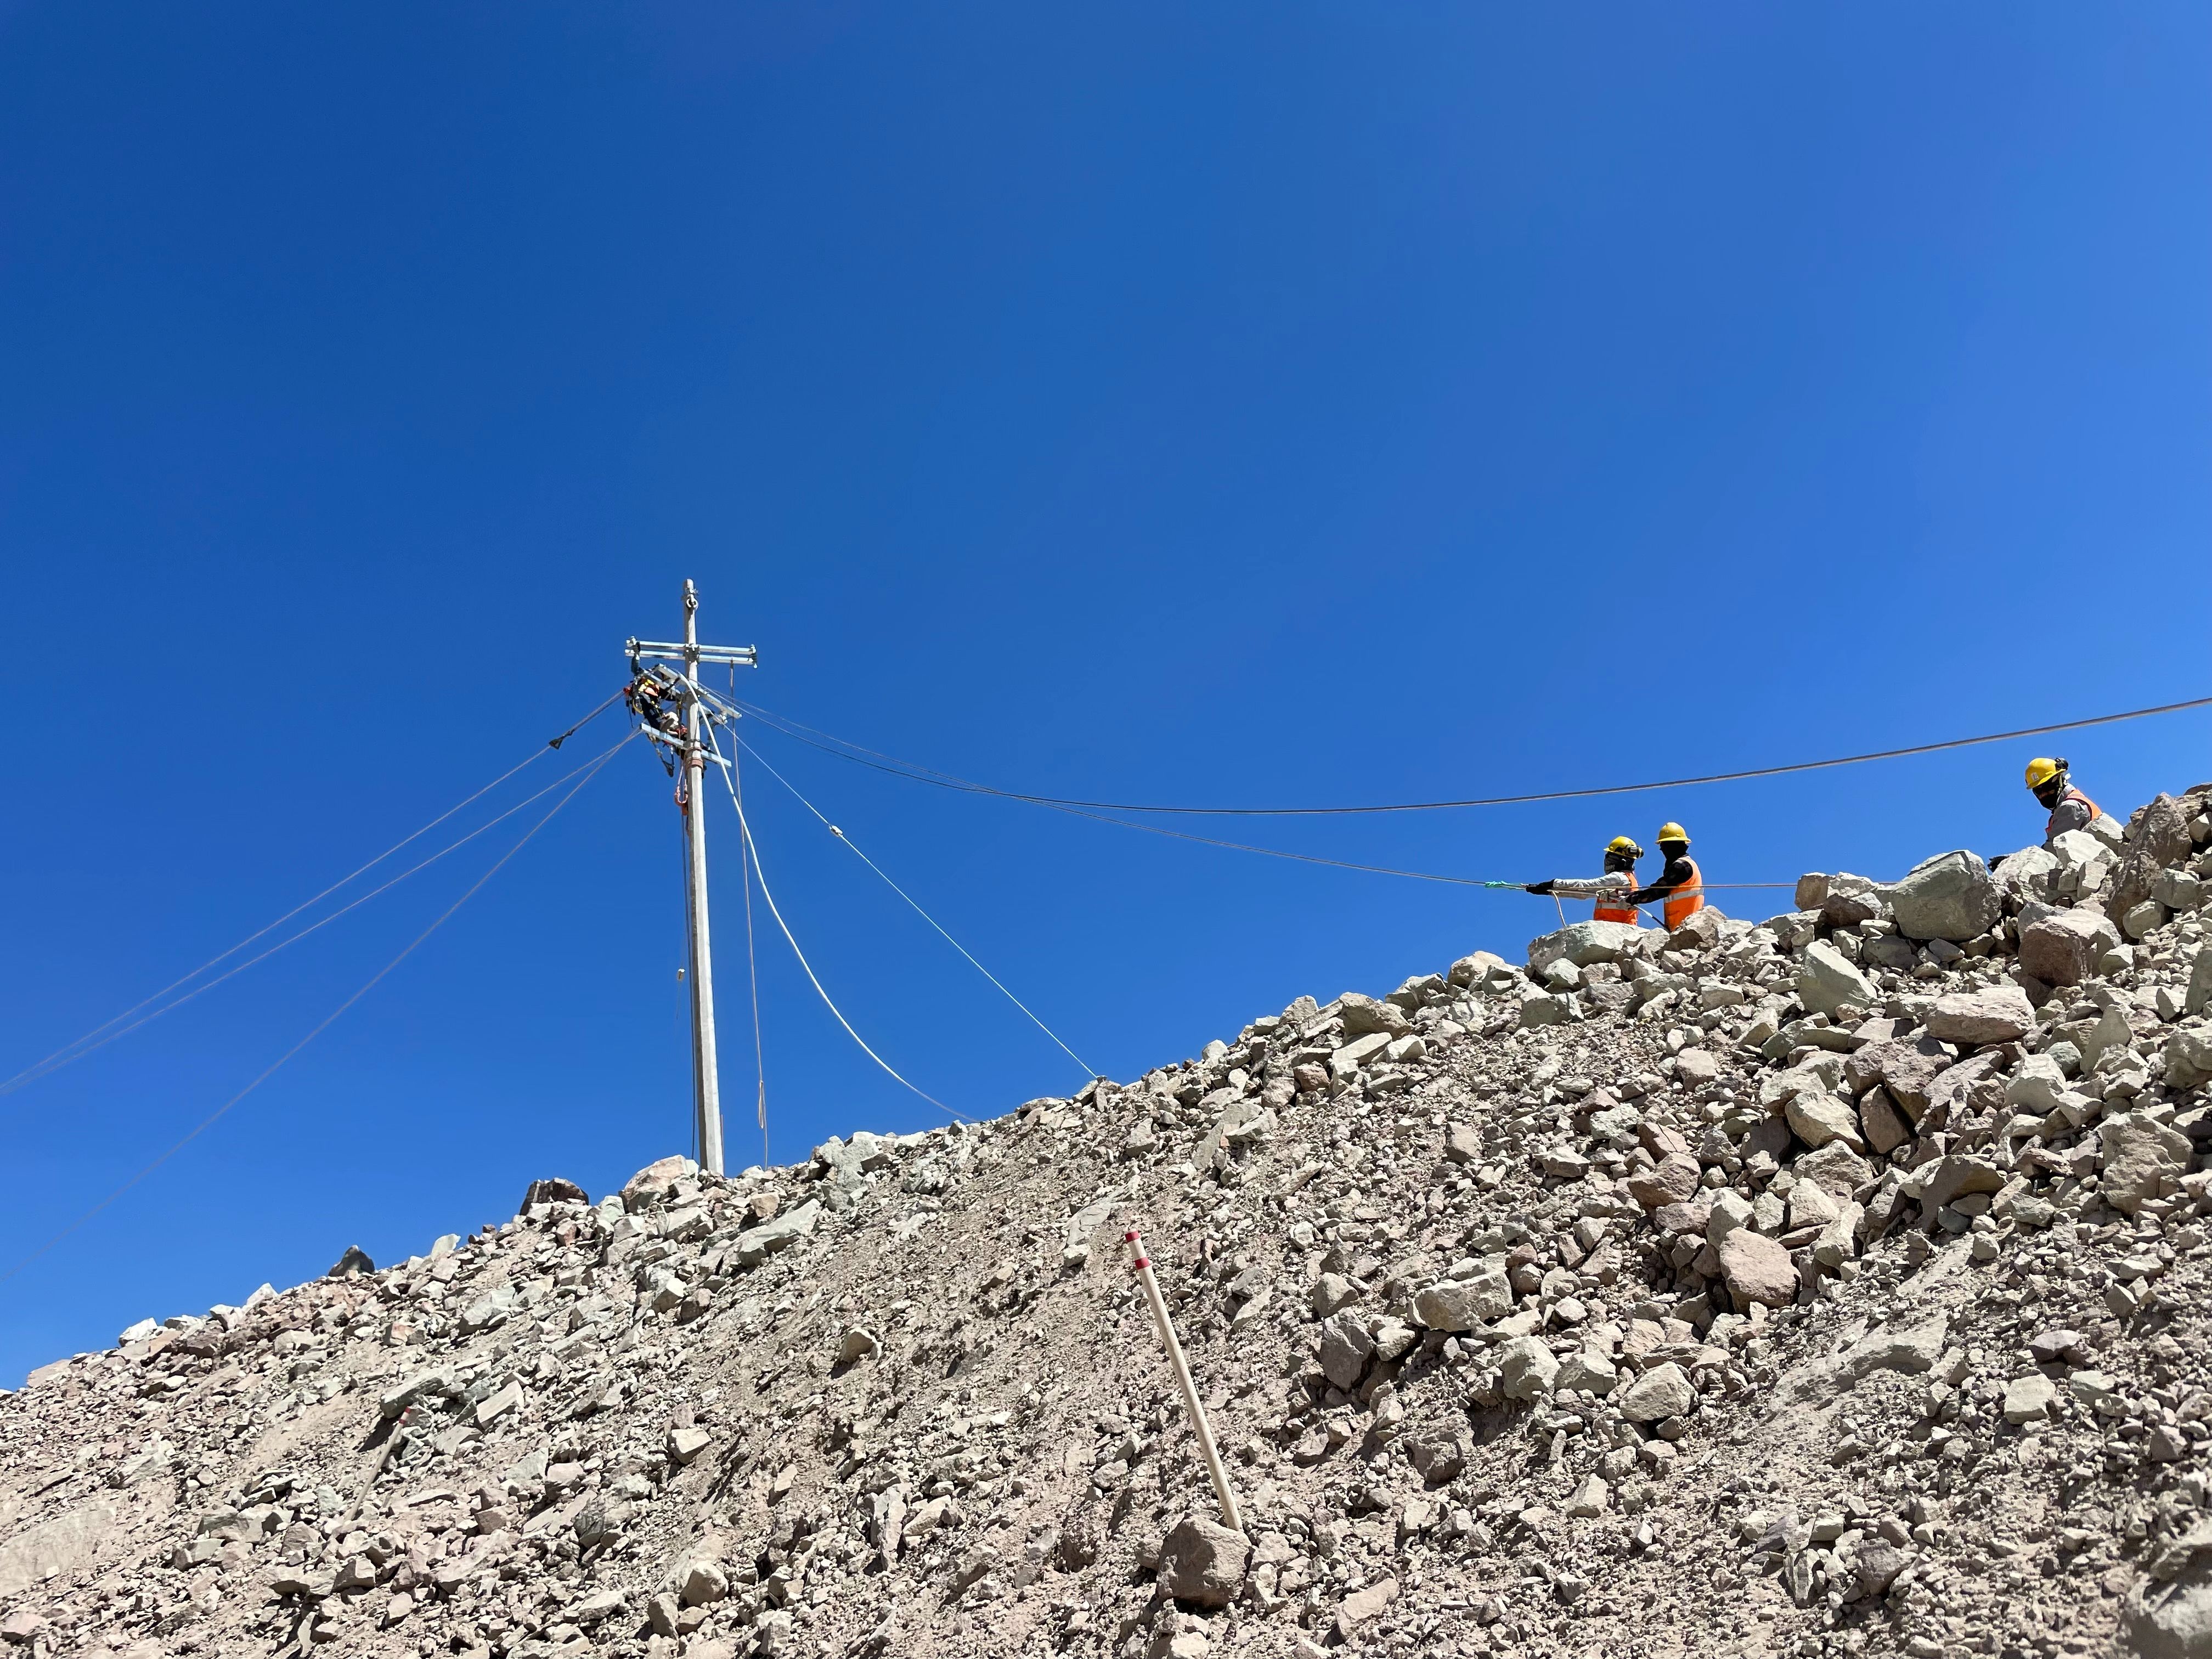 Construction of a new powerline to connect the LNG plant to Ermitaño